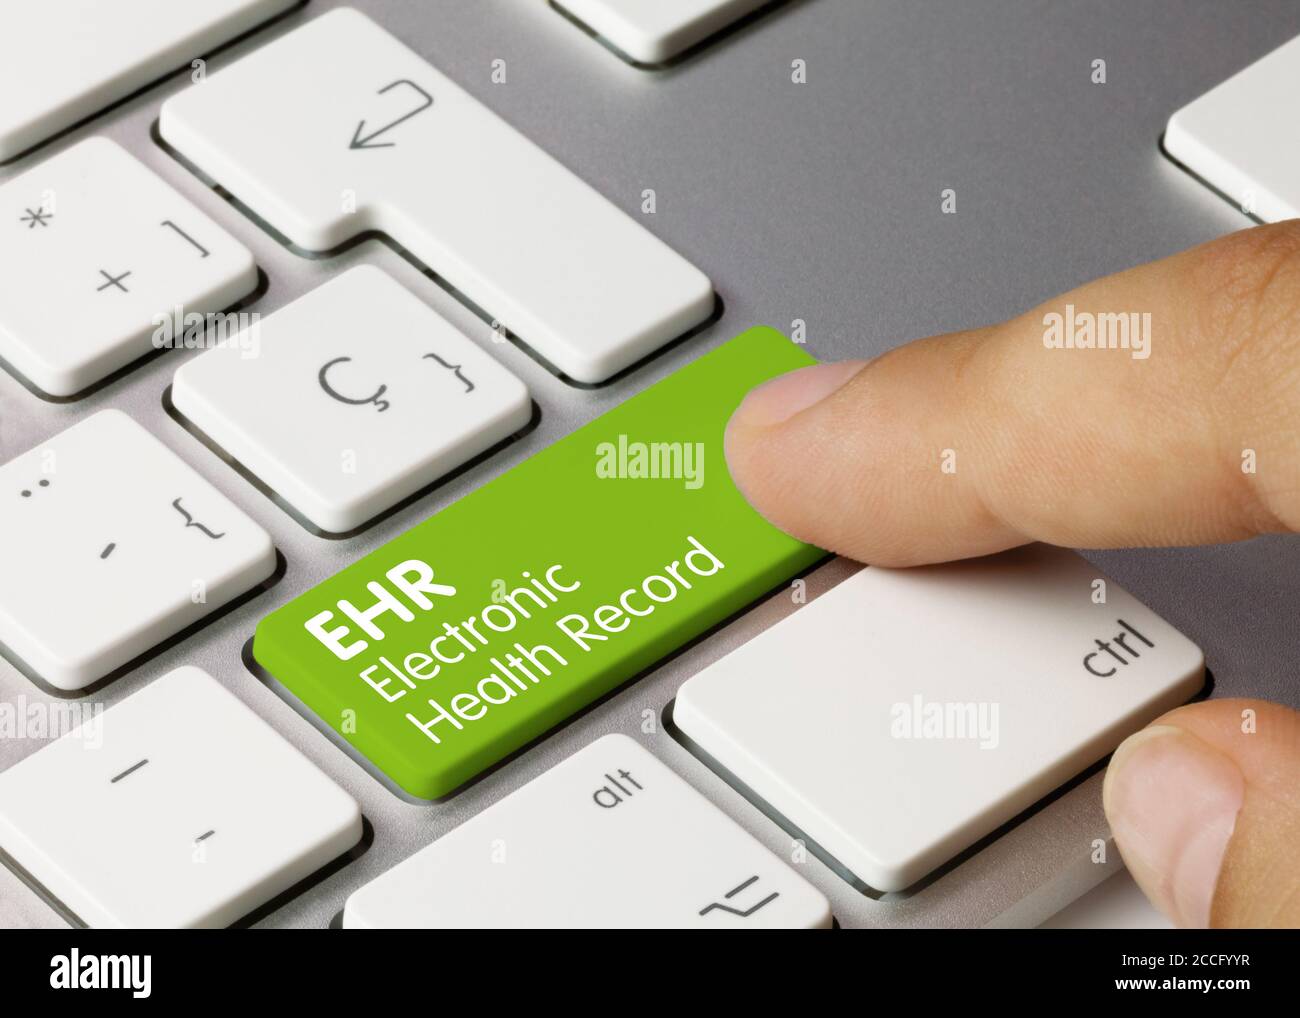 Making Albany lonely EHR Electronic health record Written on Green Key of Metallic Keyboard.  Finger pressing key Stock Photo - Alamy